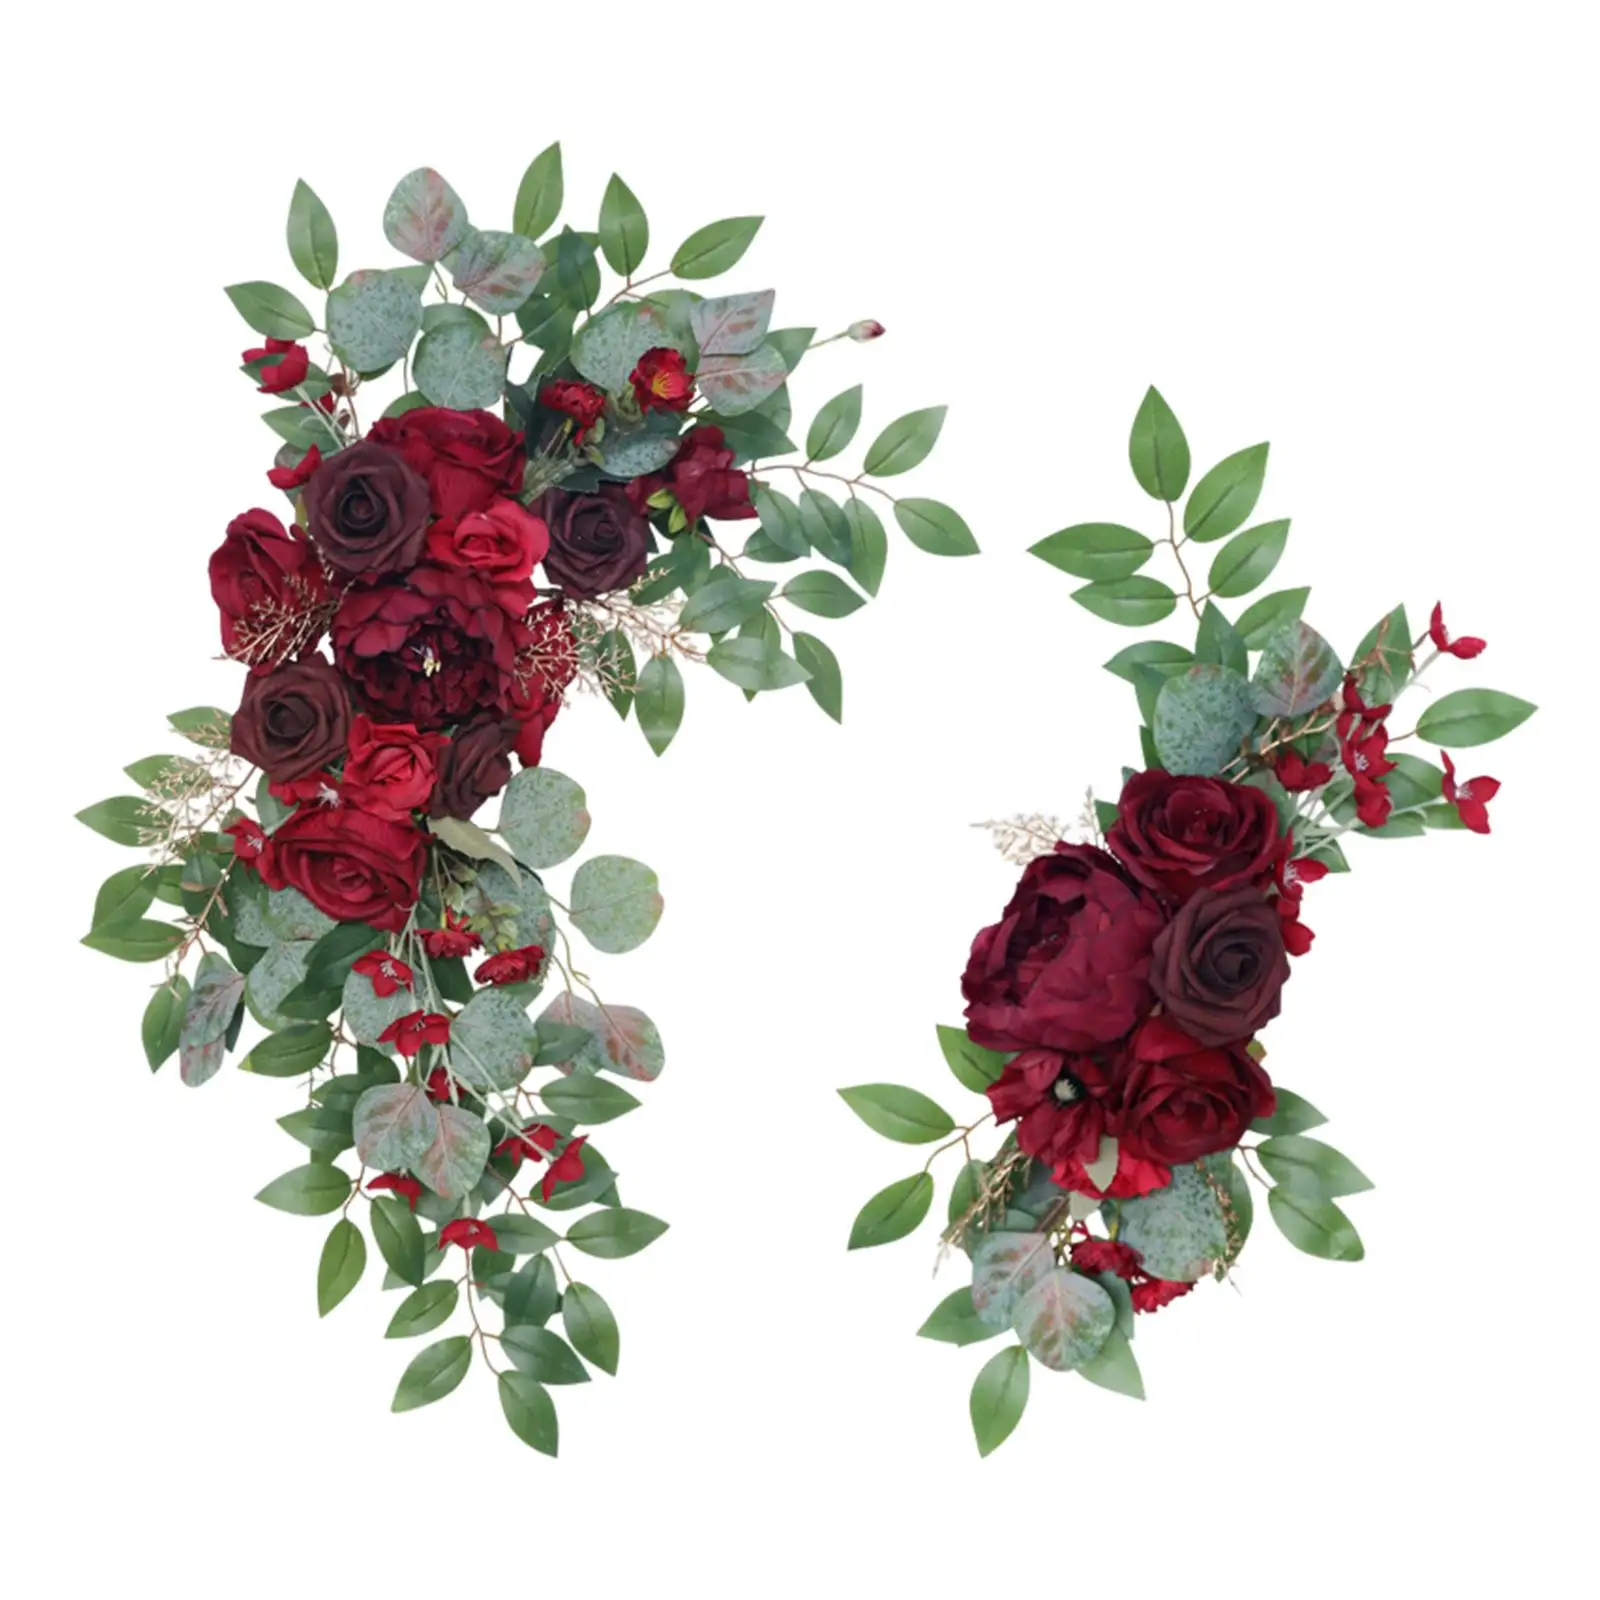 2 Pieces Artificial Flower Arch Rose Flower Wine Red Garland Props Handmade for Wedding Door Ceremony Backdrop Wall Exhibition